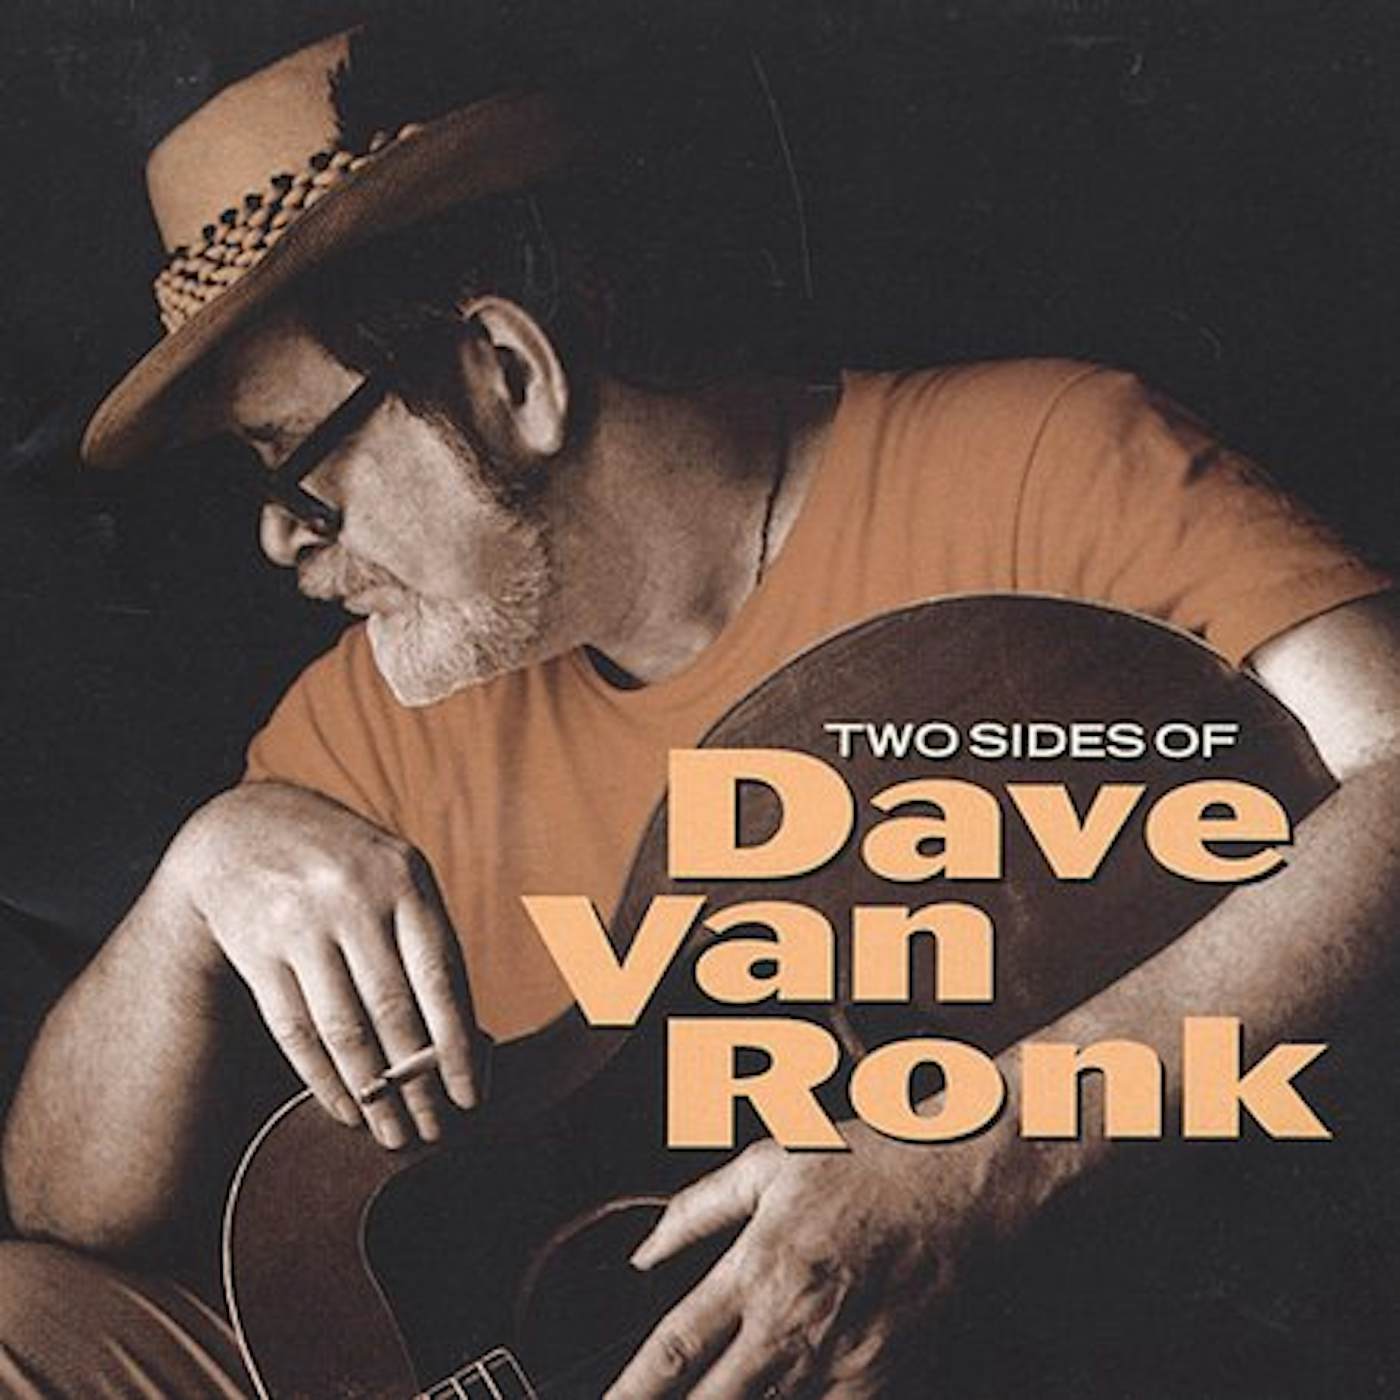 TWO SIDES OF DAVE VAN RONK CD